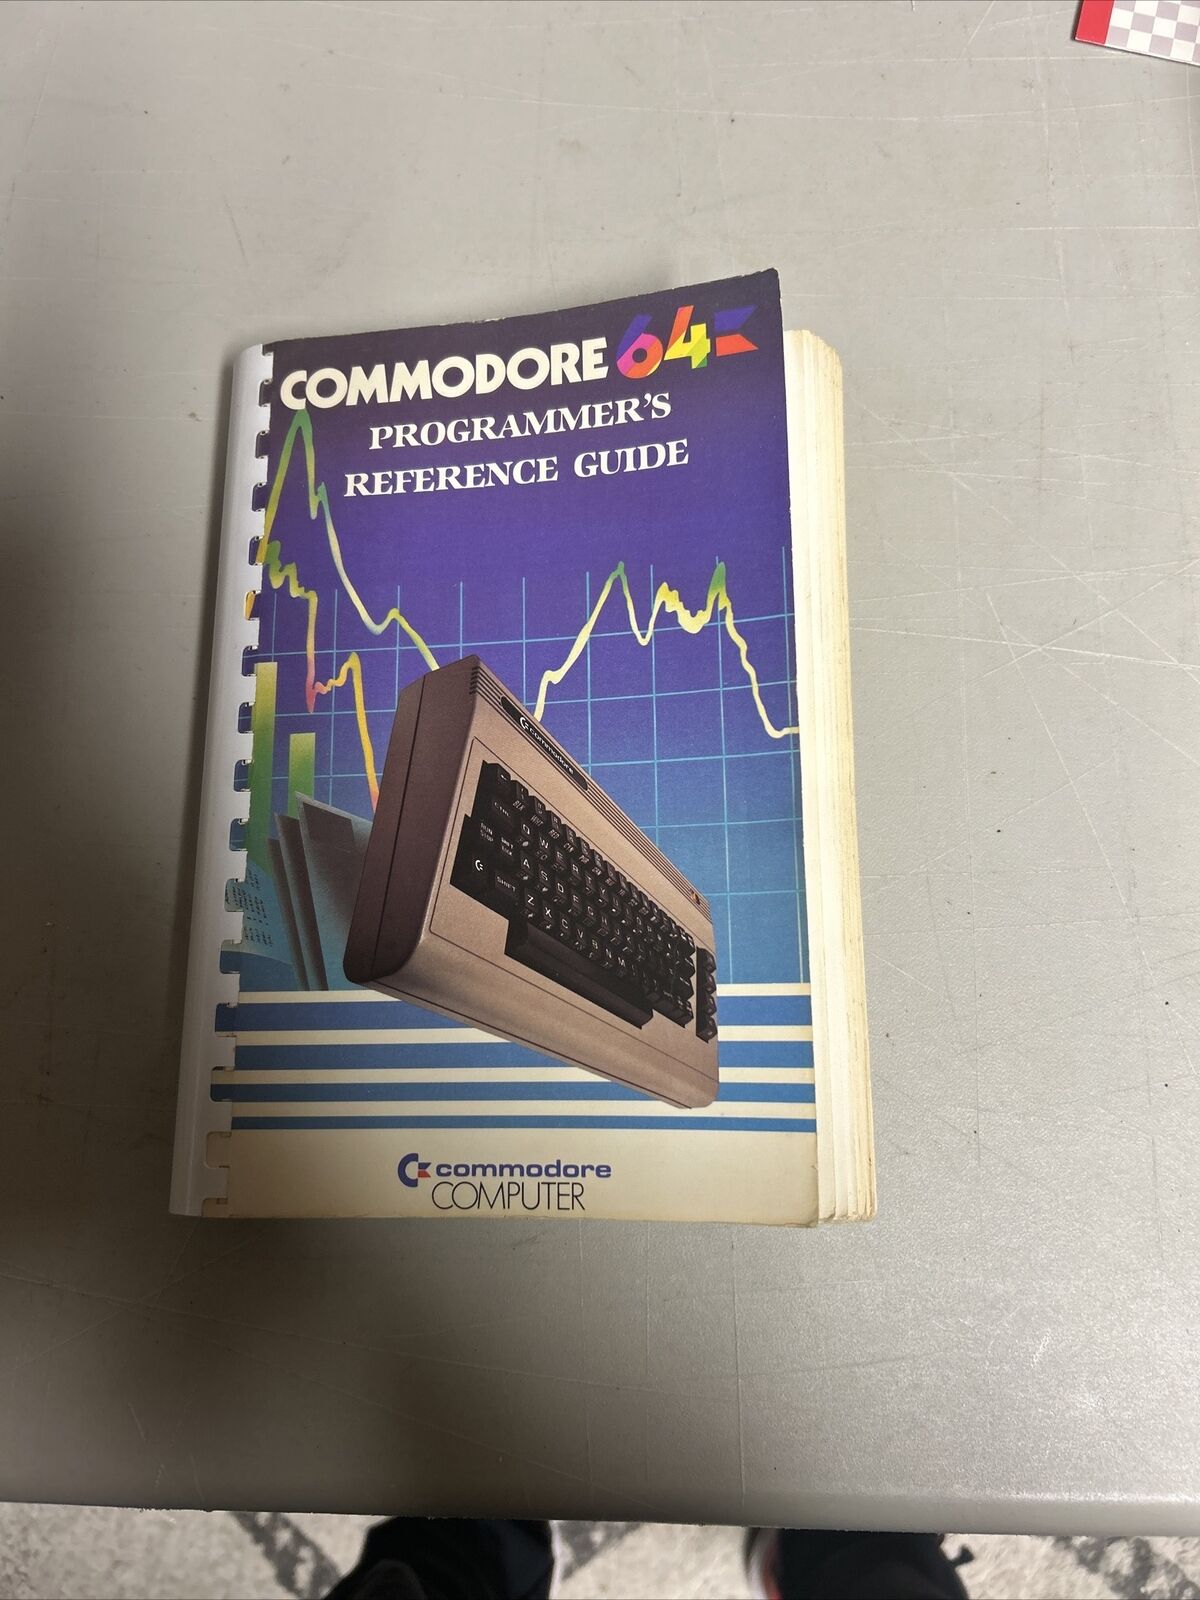 Vintage Commodore 64 Programmer's Reference Guide 1983 1st Edition, 7th Printing